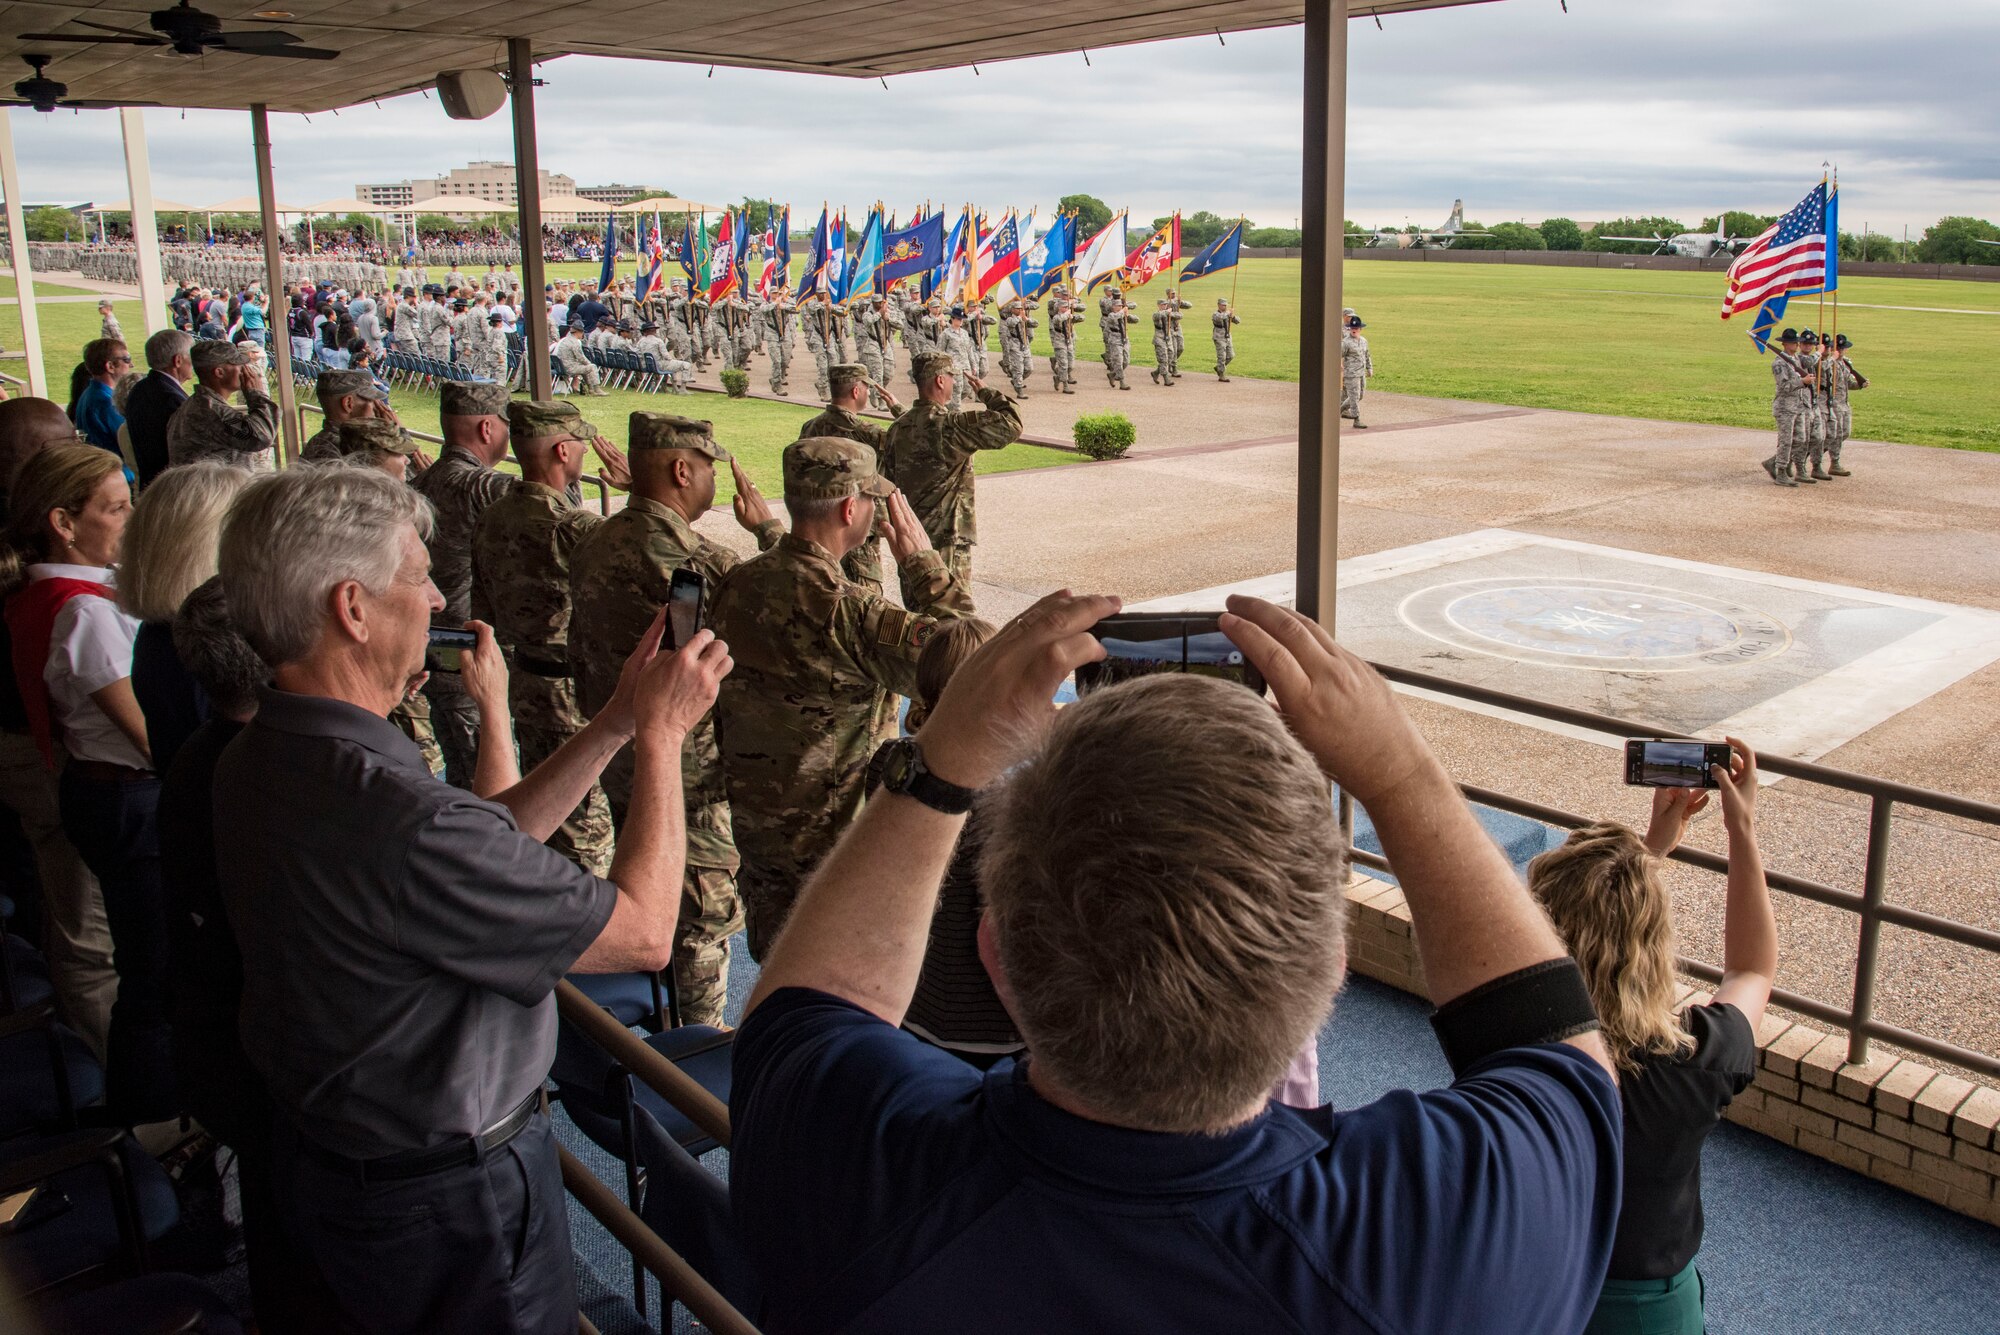 Air Mobility Command civic leaders observe the graduation ceremony of the United States Air Force's newest Airmen, Joint Base San Antonio-Lackland, Texas, May 2, 2019.  The civic leaders toured the 37th Training Wing, also known as the “Gateway Wing,” as guests of AMC Cmmander Gen. Maryanne Miller.